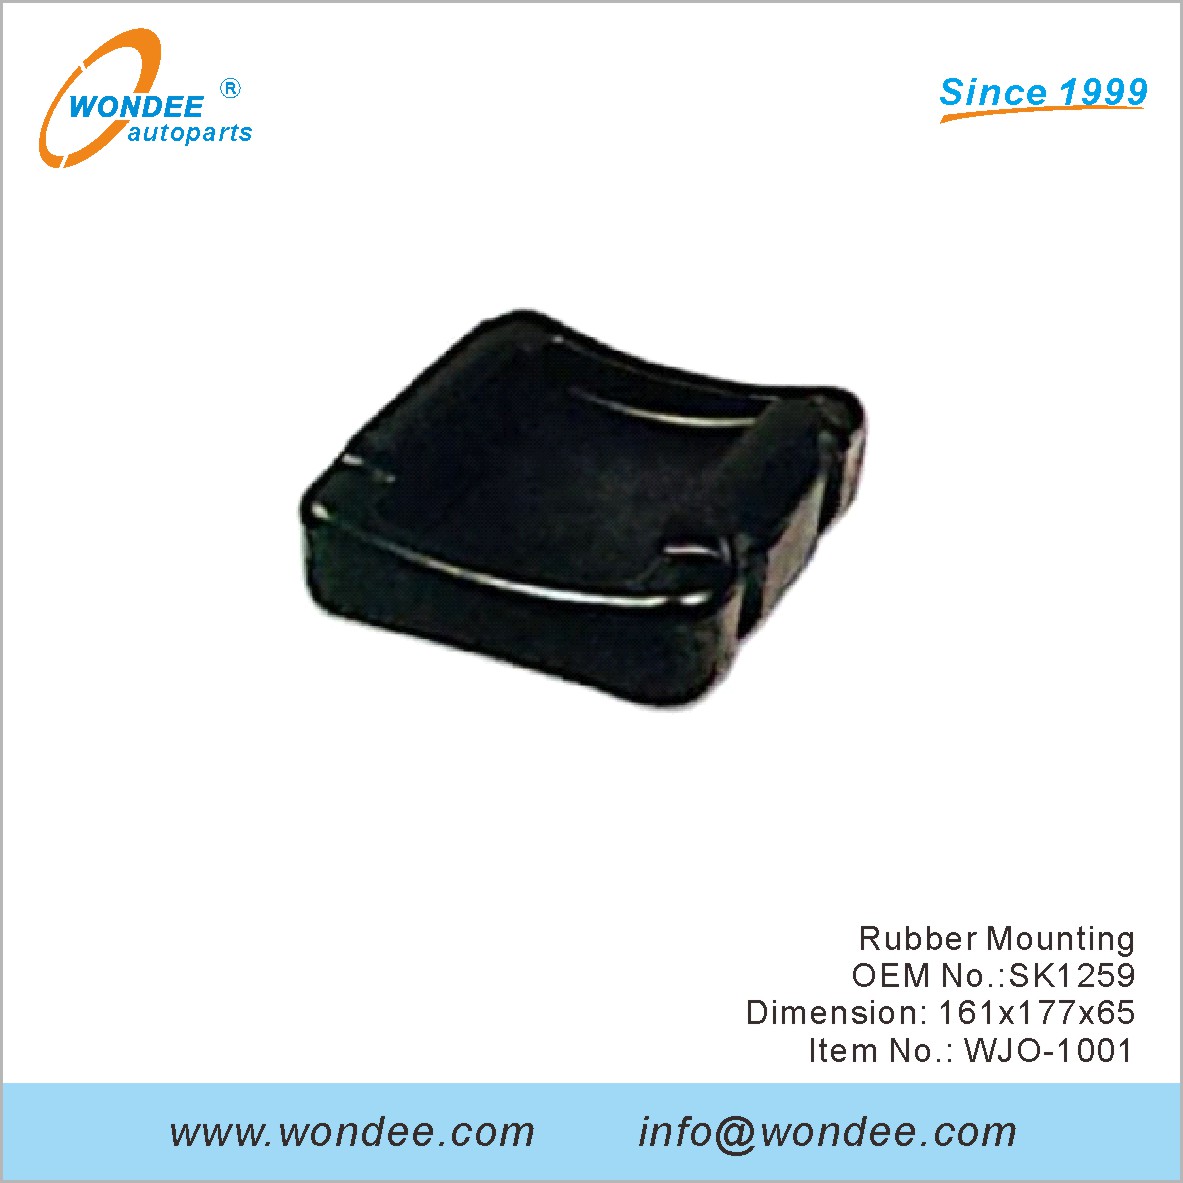 Rubber Mounting OEM SK1259 for JOST from WONDEE